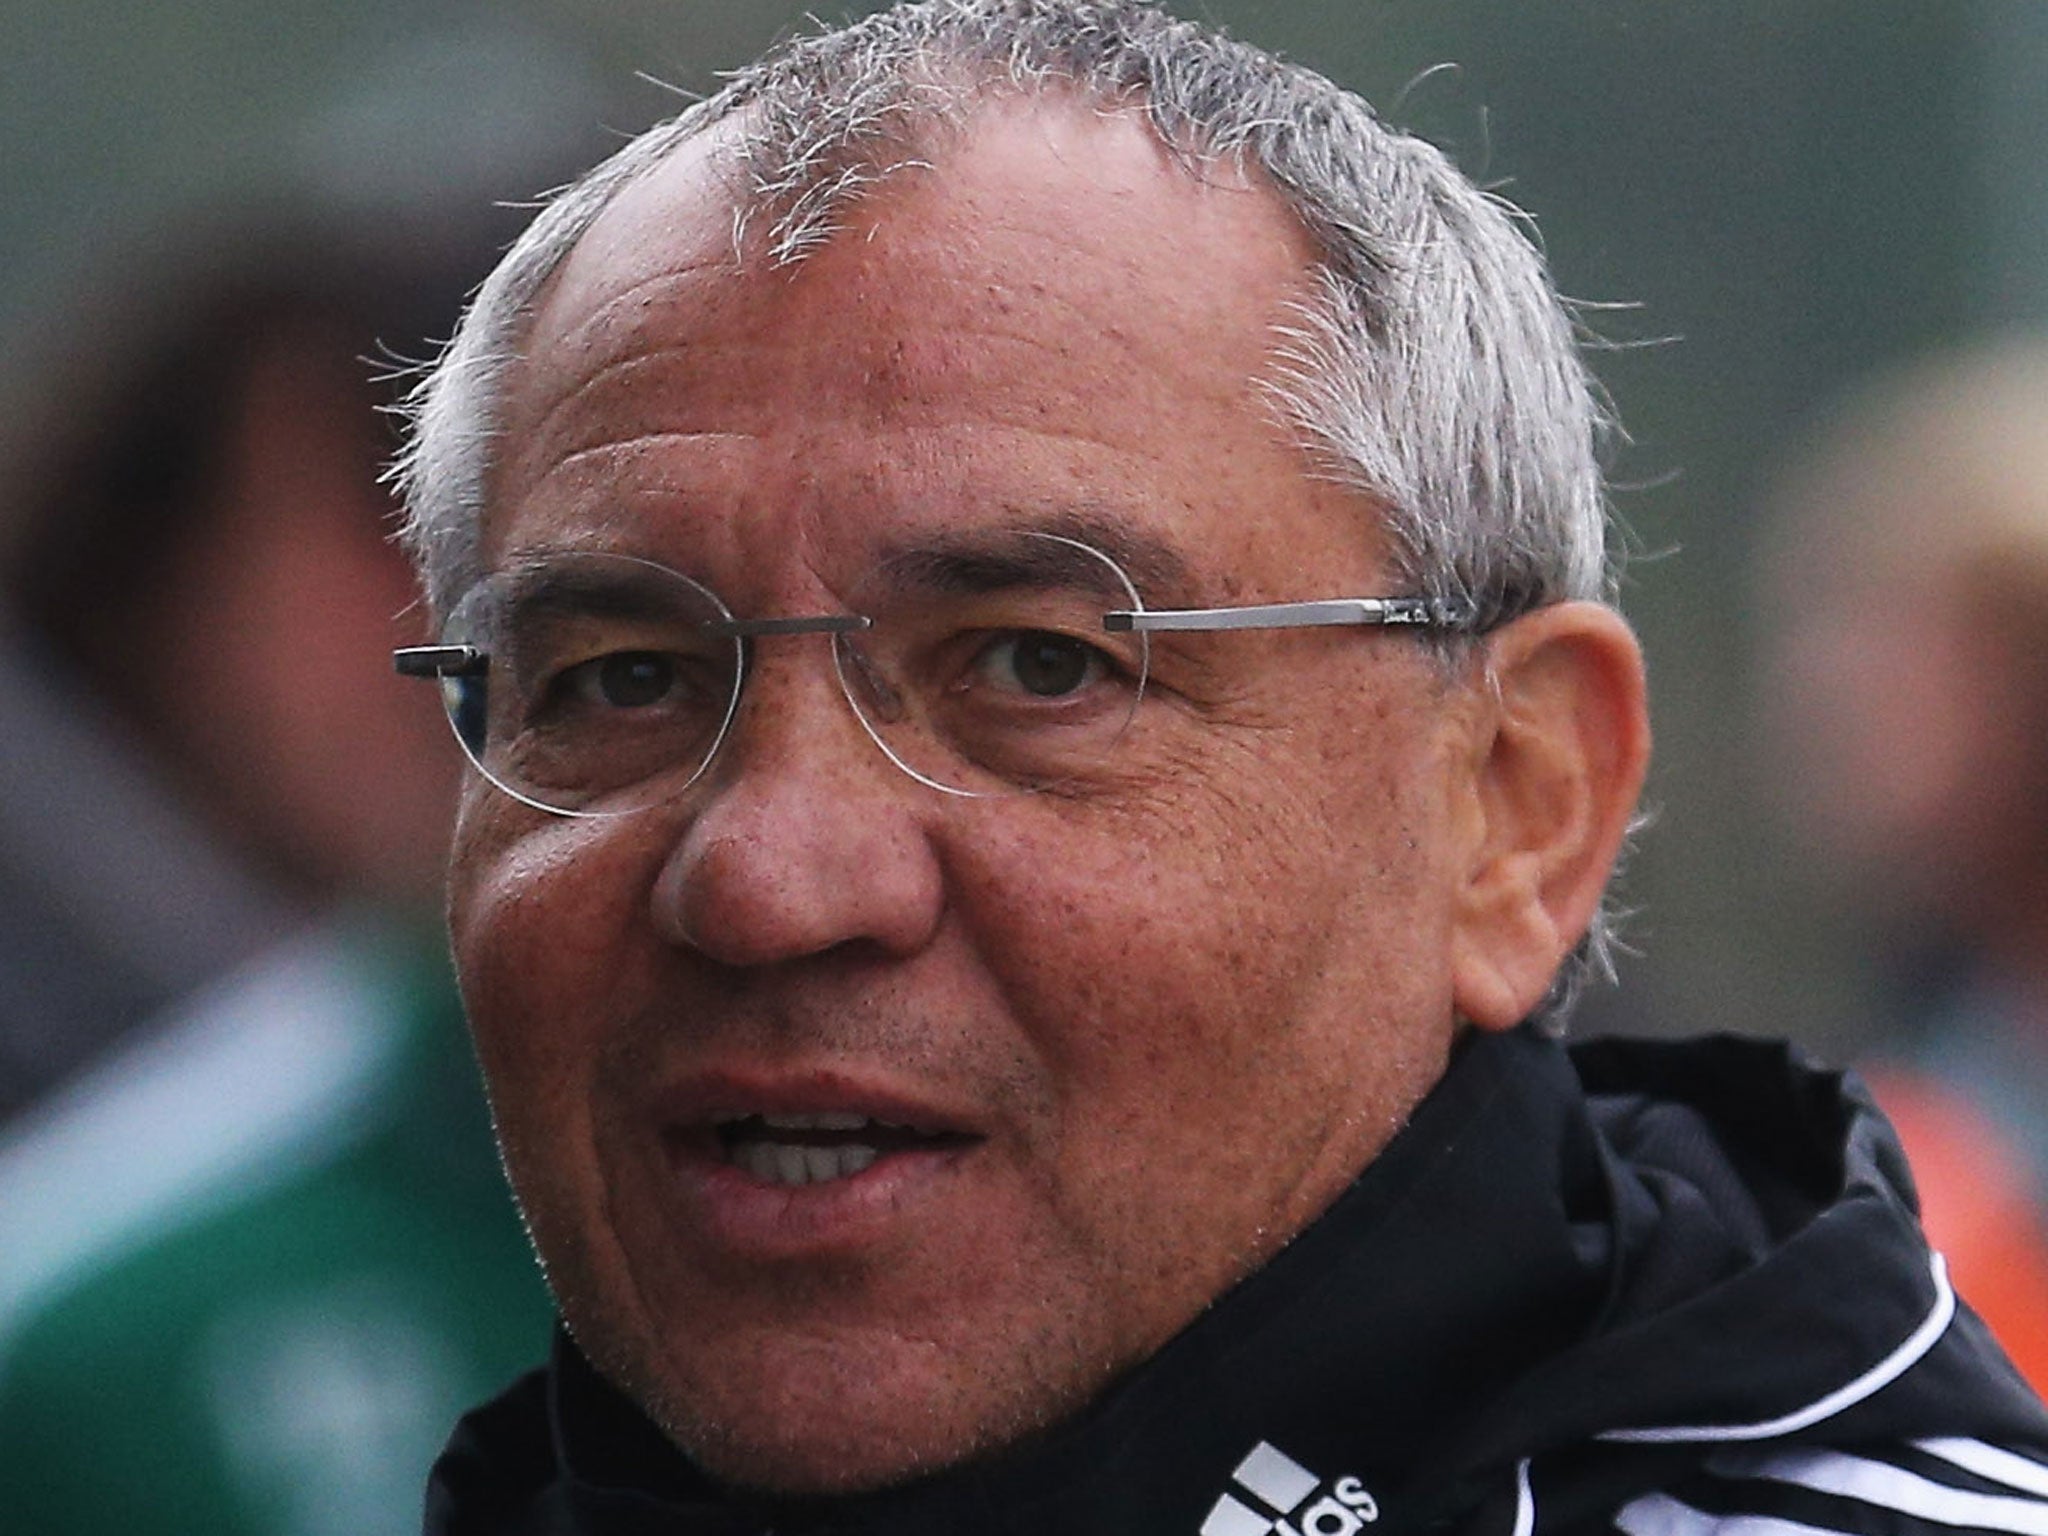 Felix Magath has replaced Rene Meulensteen as Fulham manager